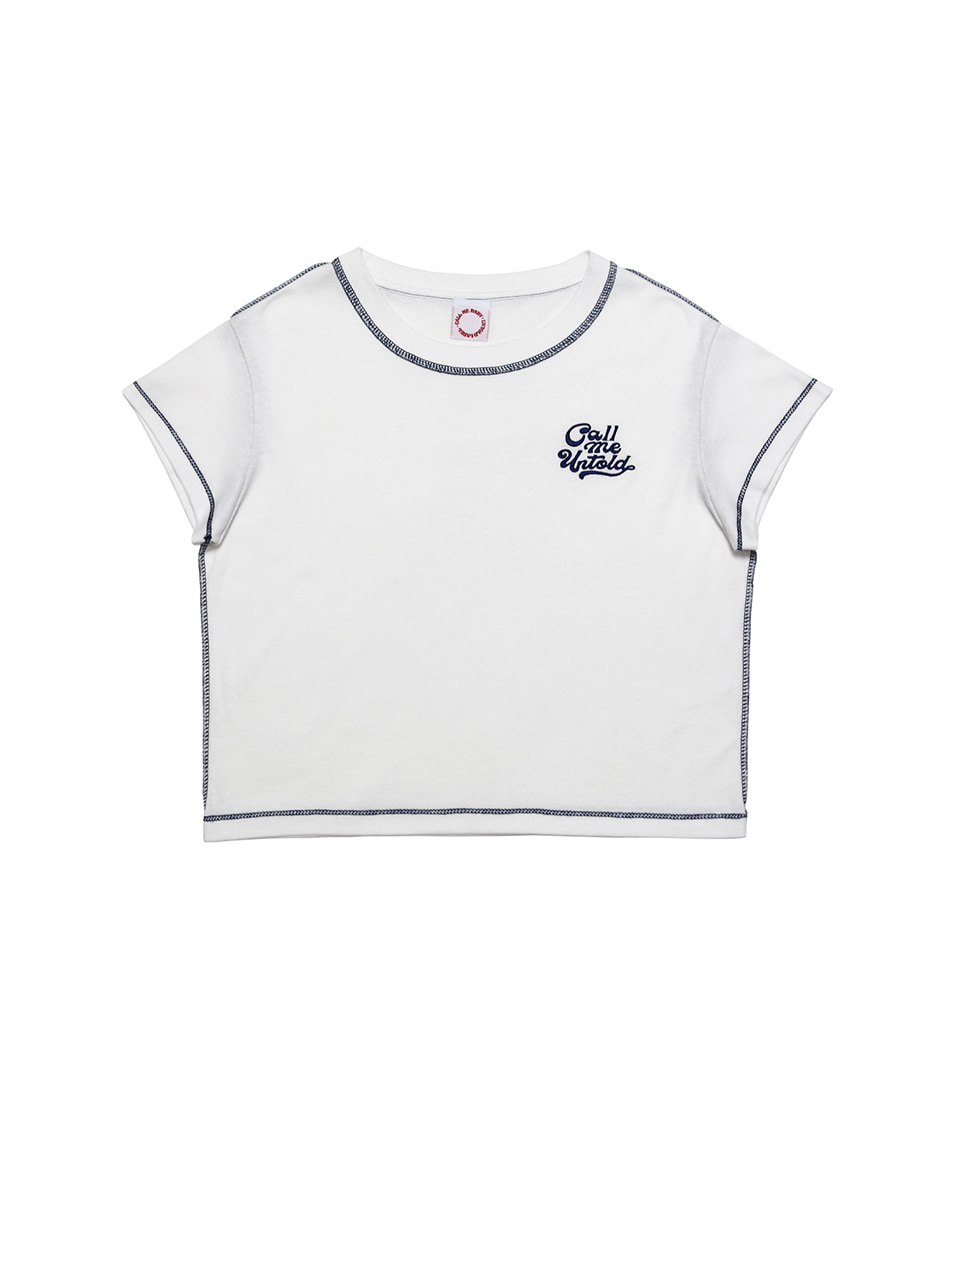 [with Call Me Baby] OVERSTITCH T-SHIRT - WHITE